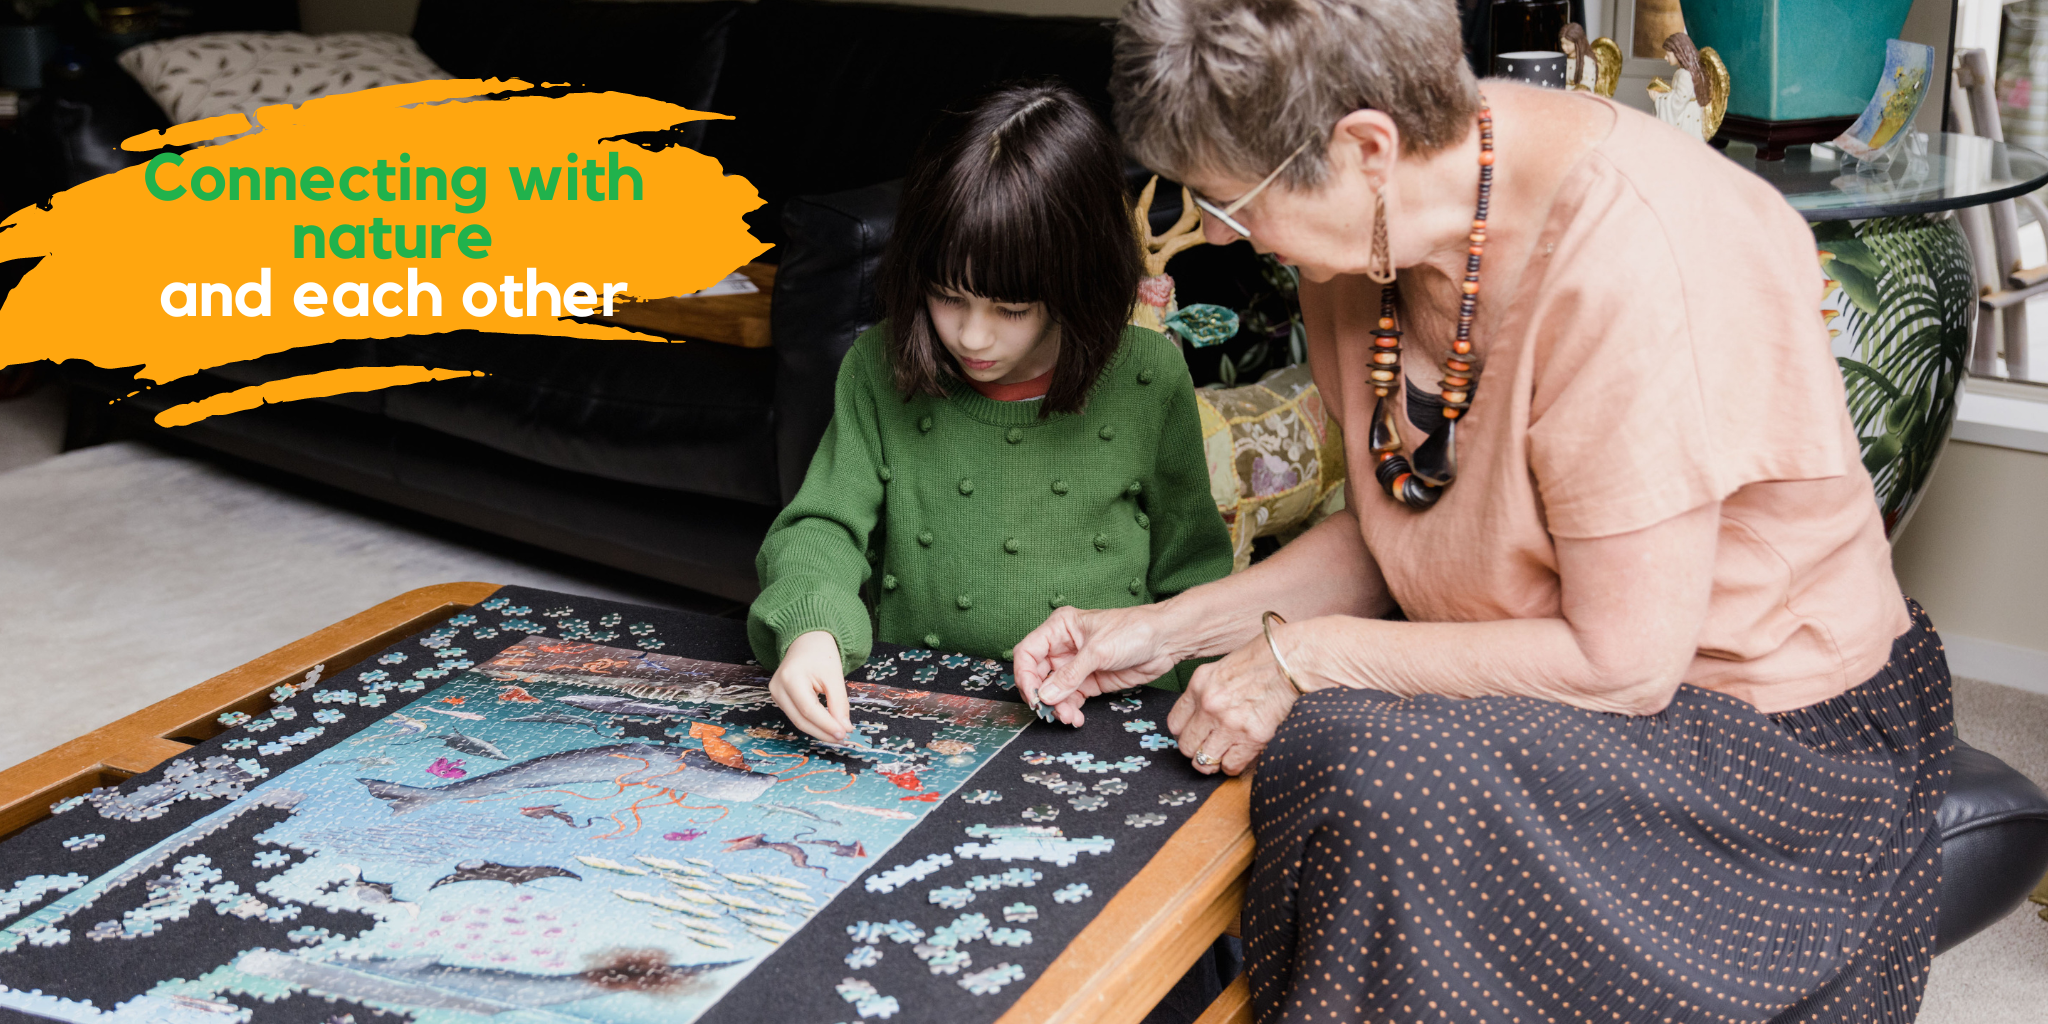 A 6 year old girl and her grandmother in a living room completing a jigsaw puzzle. They are sitting next to a low coffee table. The text says "Connecting with nature and each other"